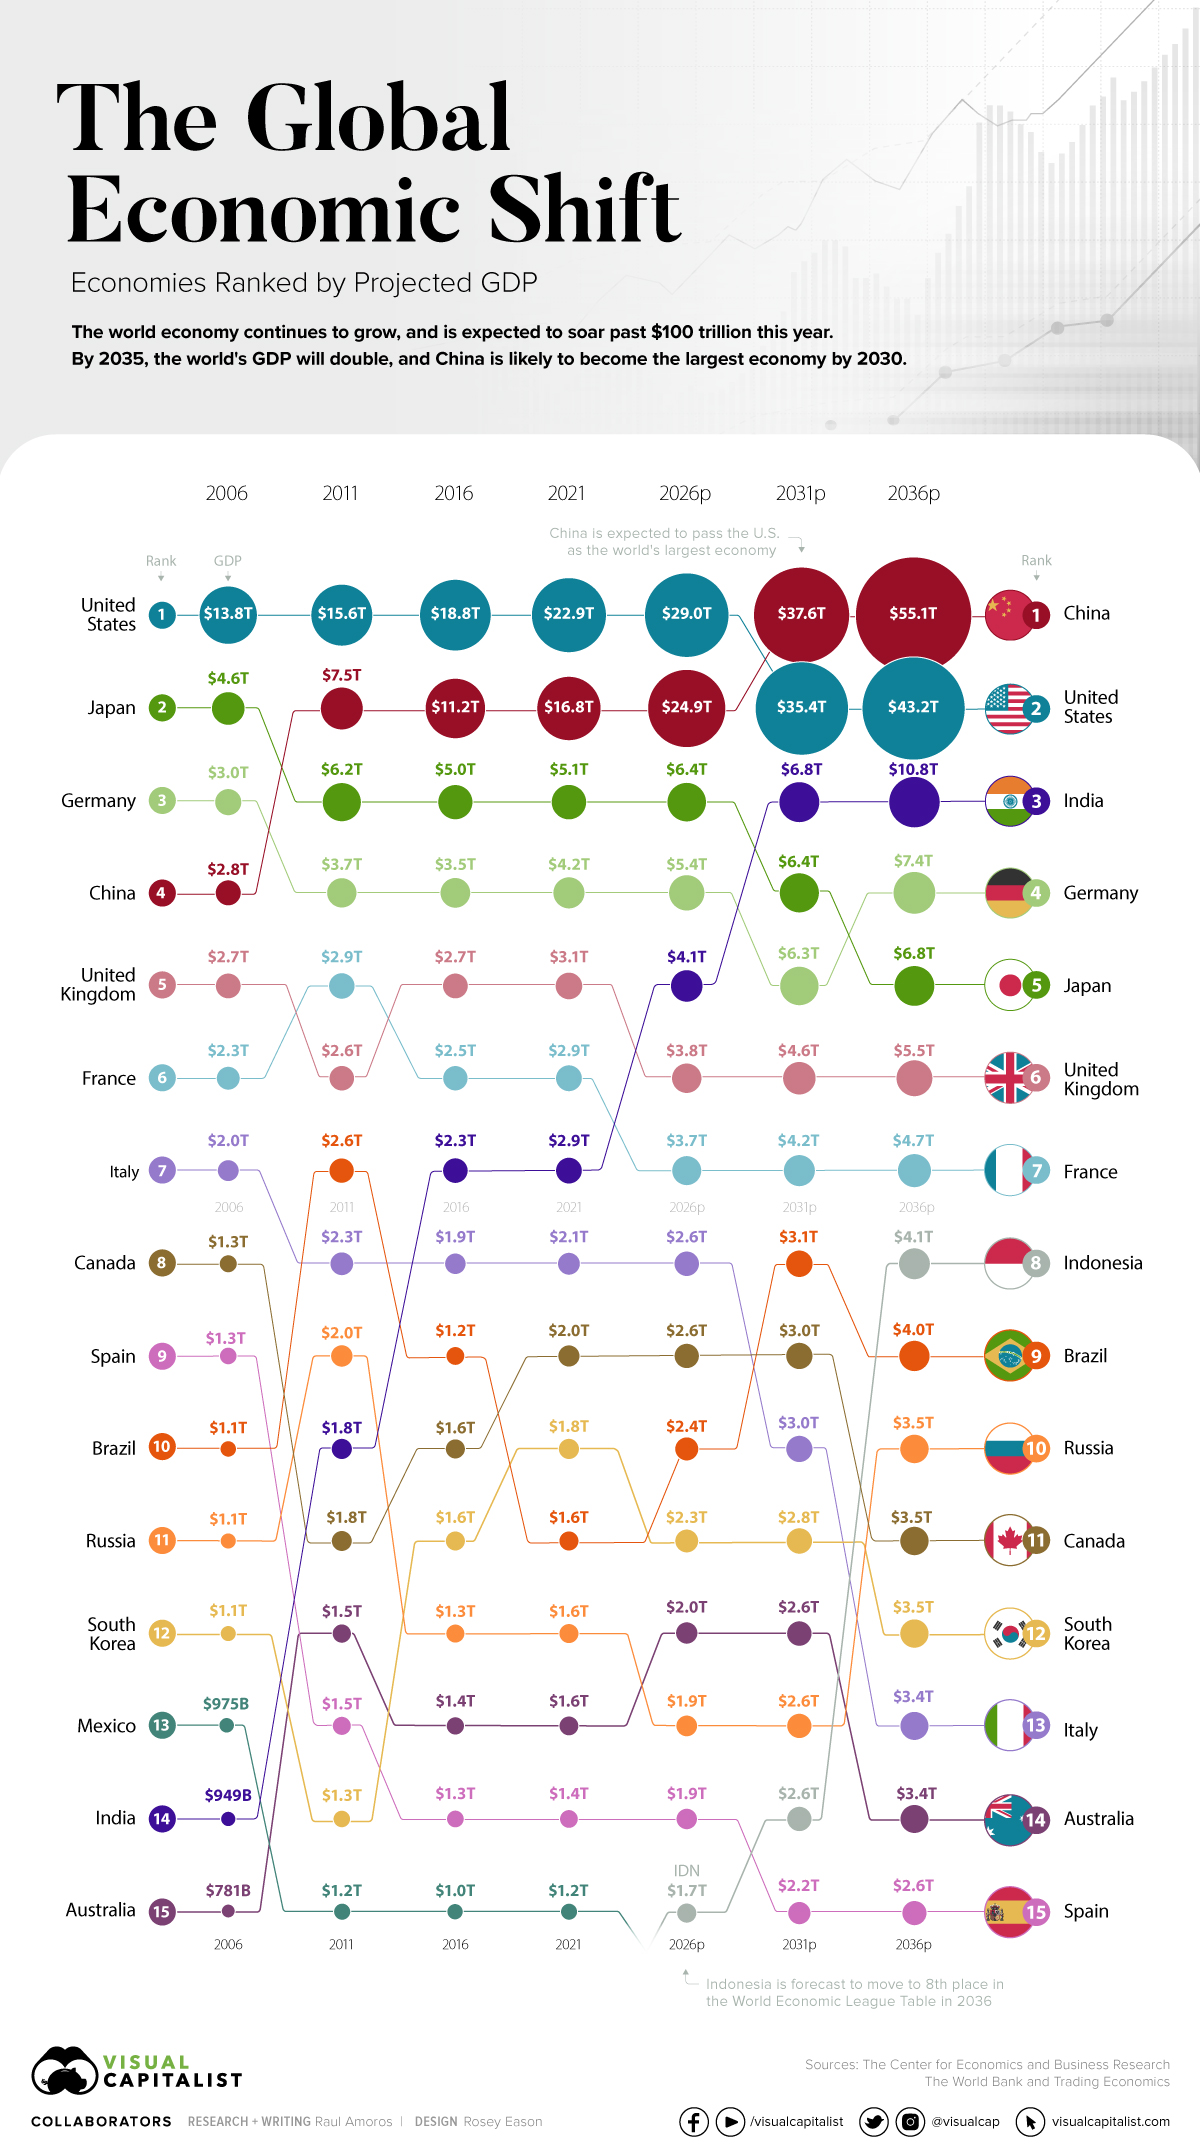 Visualizing the Coming Shift in Global Economic Power (2006-2036p)